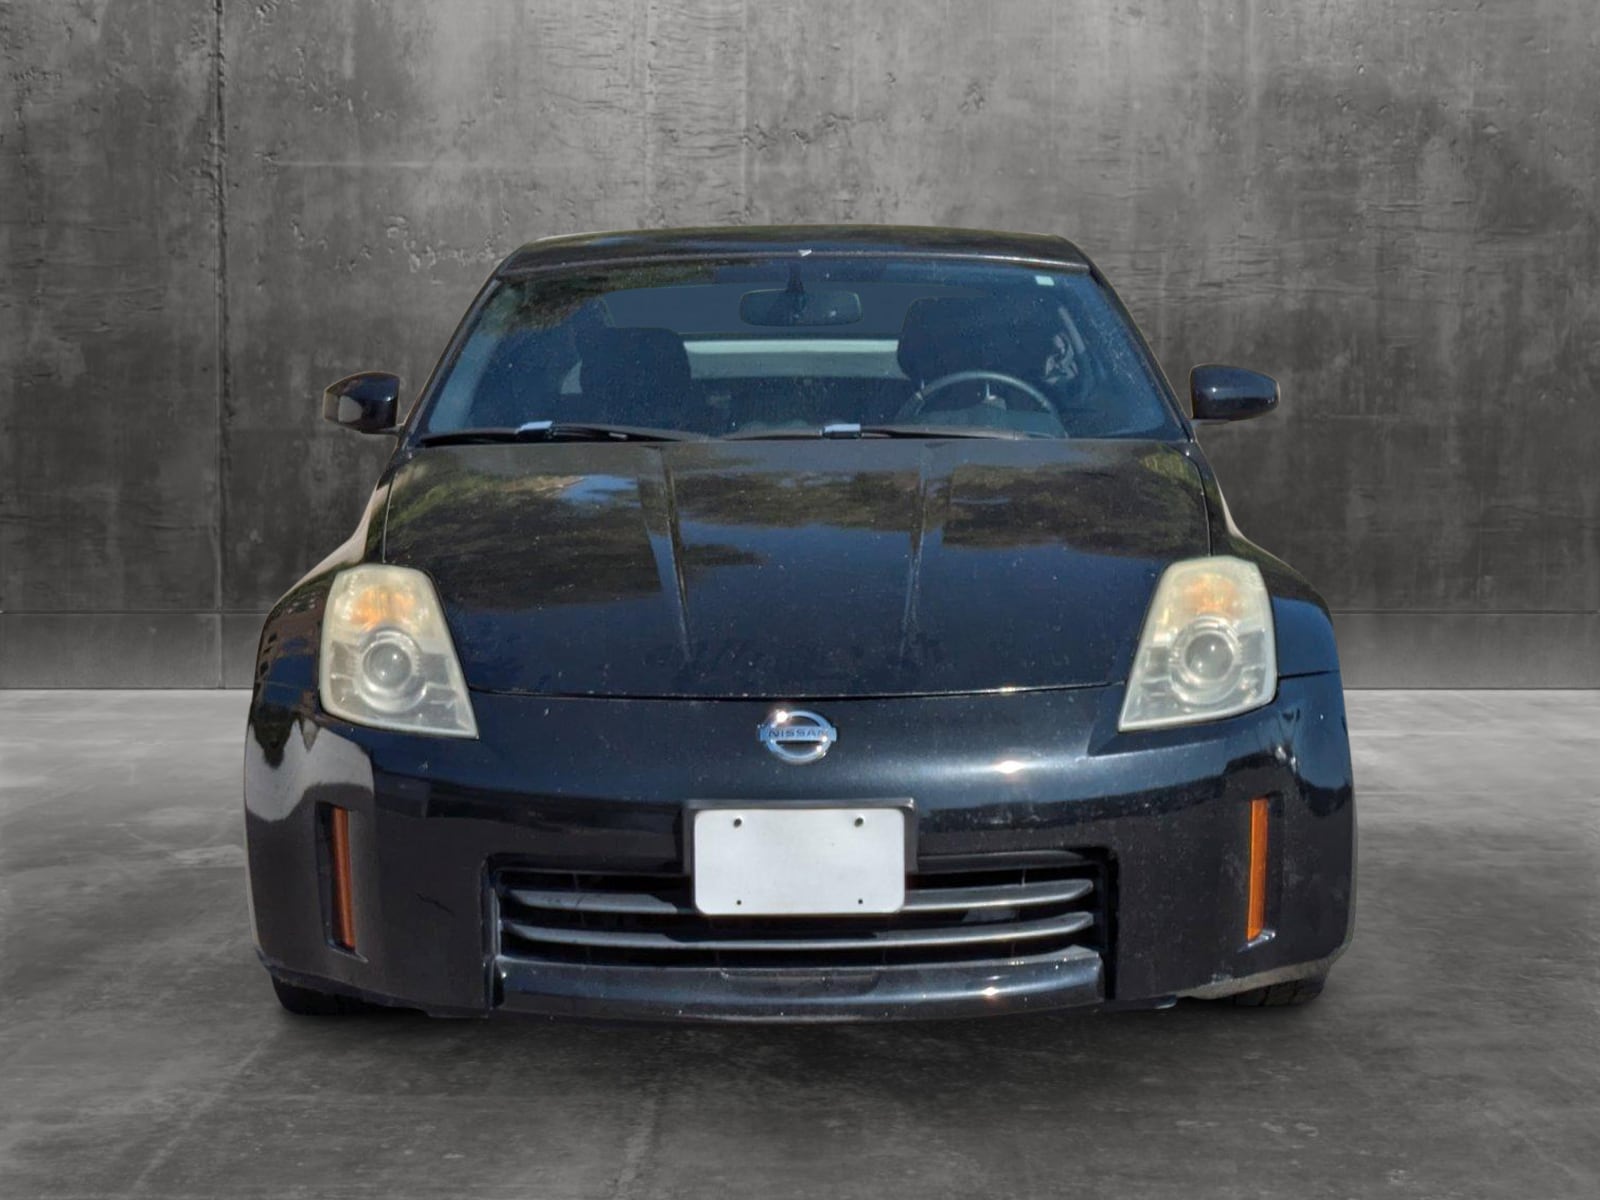 Used 2006 Nissan 350Z Enthusiast with VIN JN1AZ34EX6M352864 for sale in Costa Mesa, CA